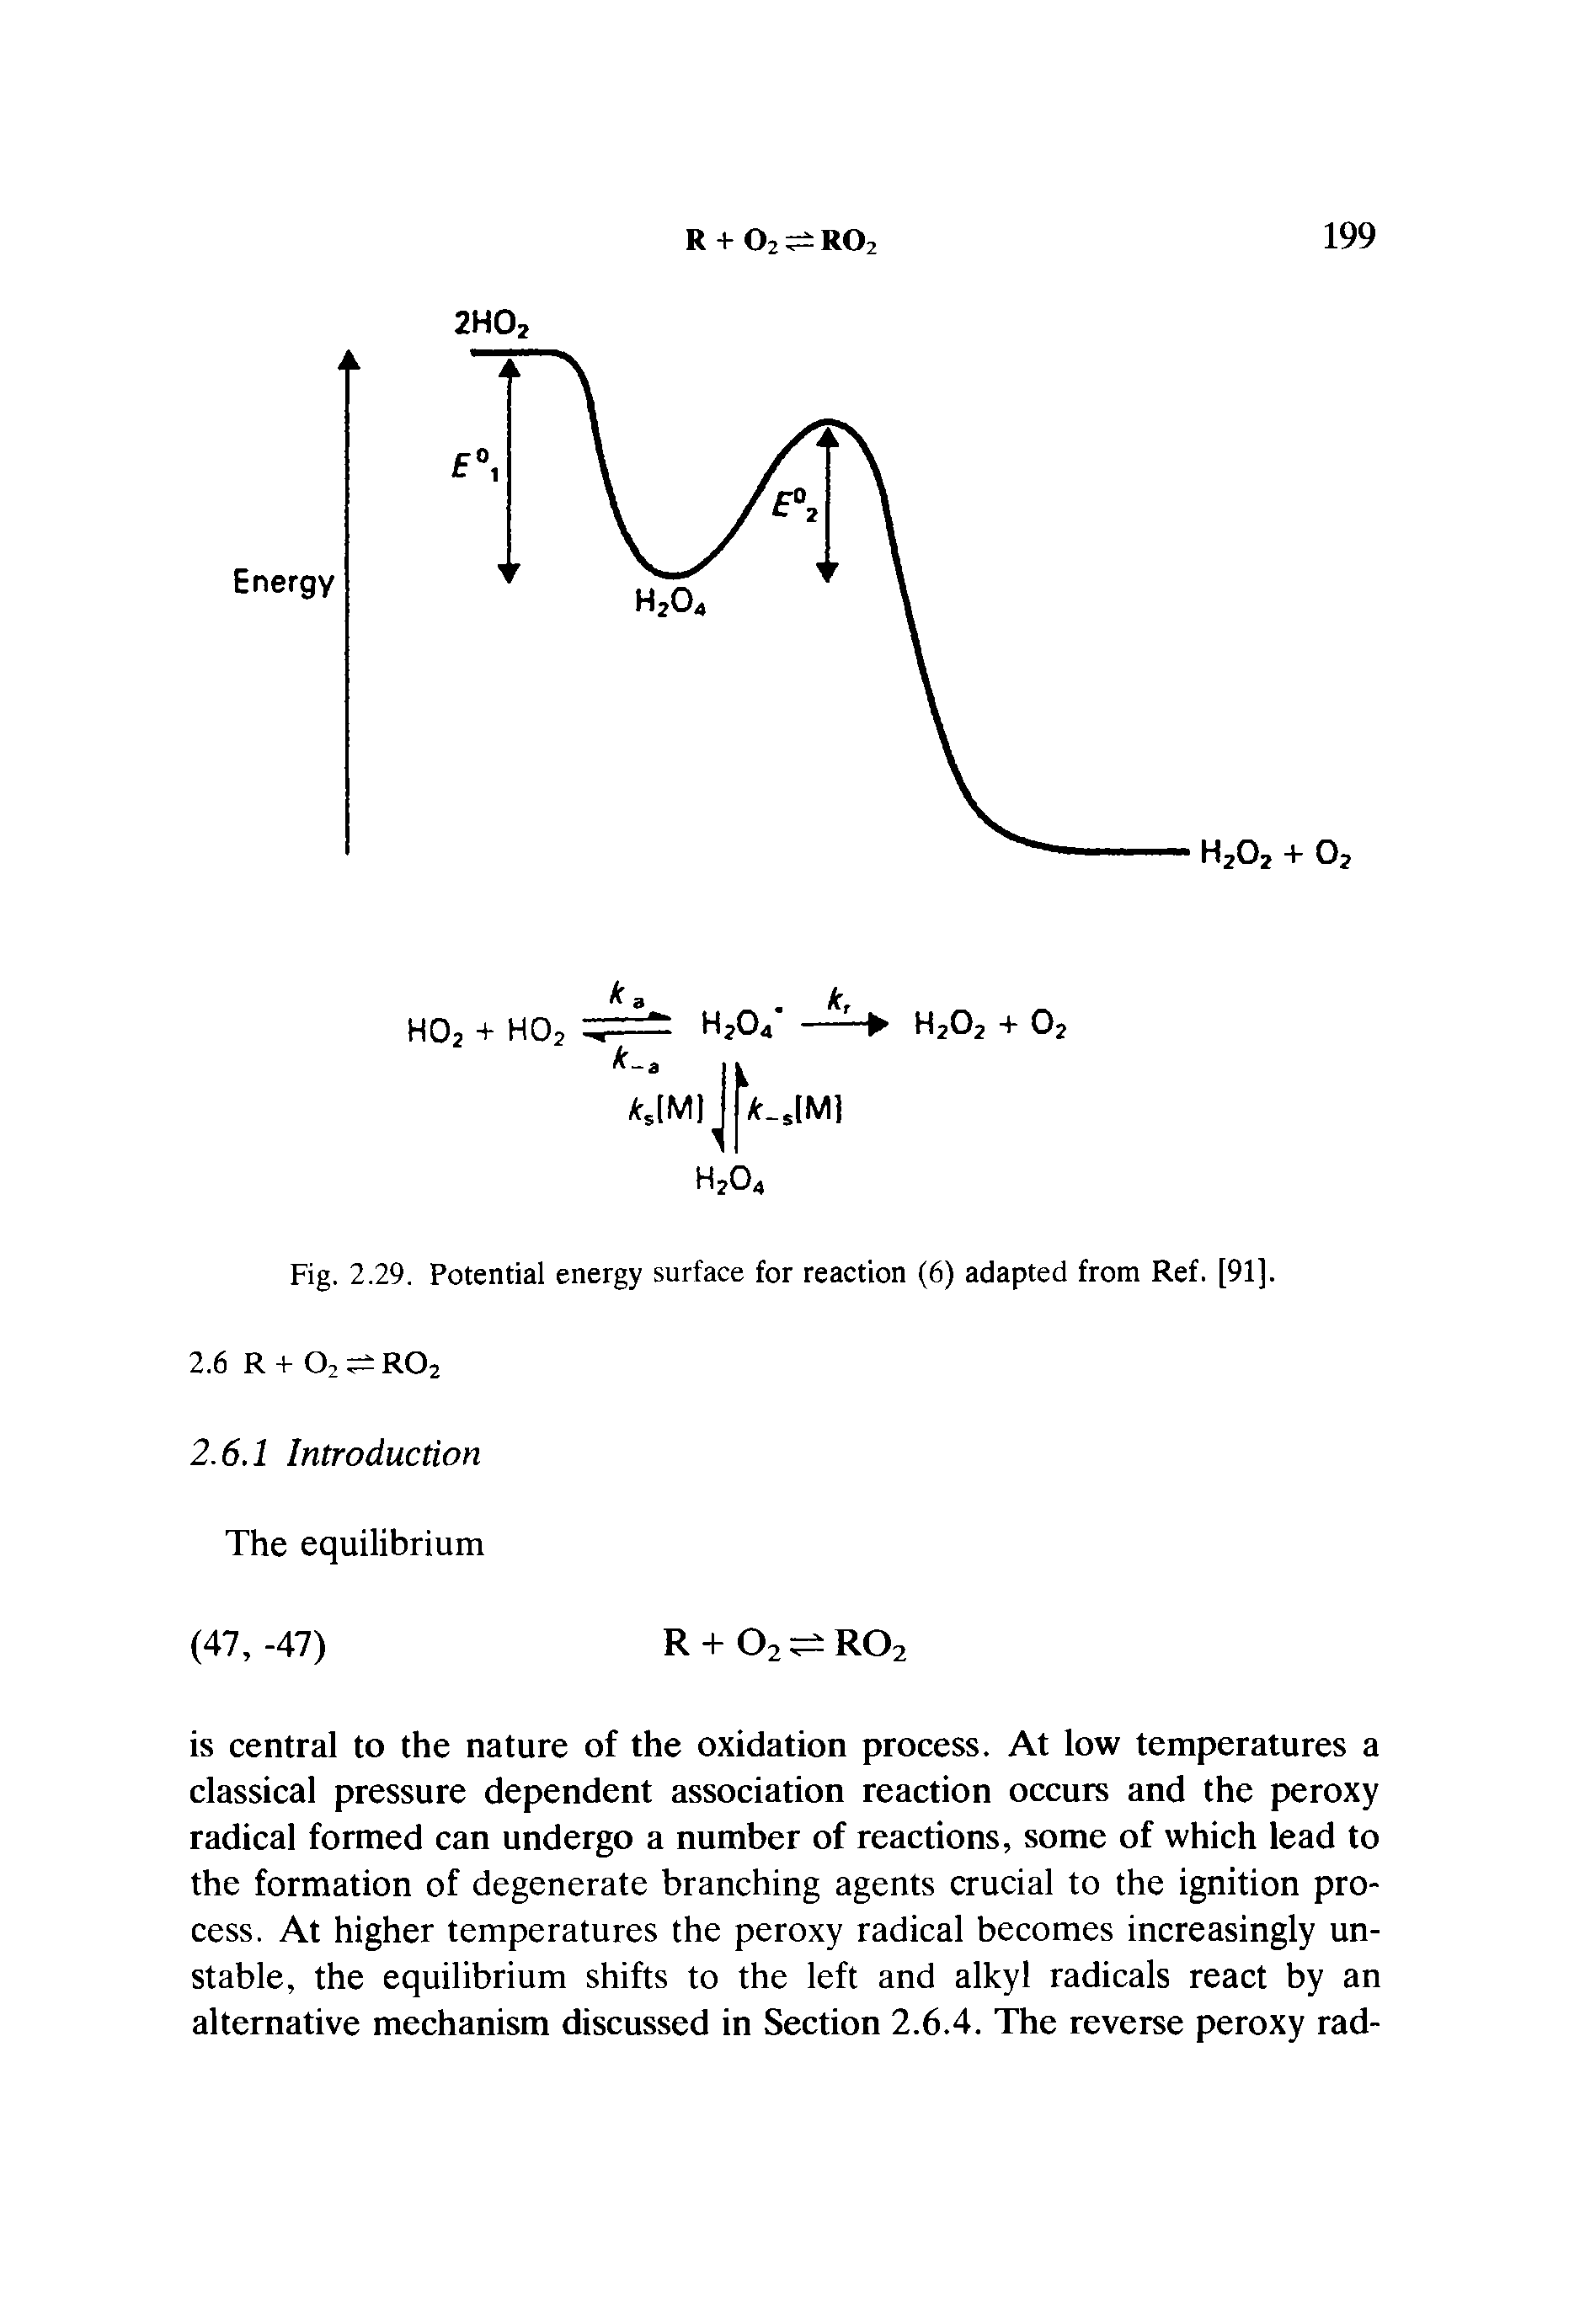 Fig. 2.29. Potential energy surface for reaction (6) adapted from Ref. [91].